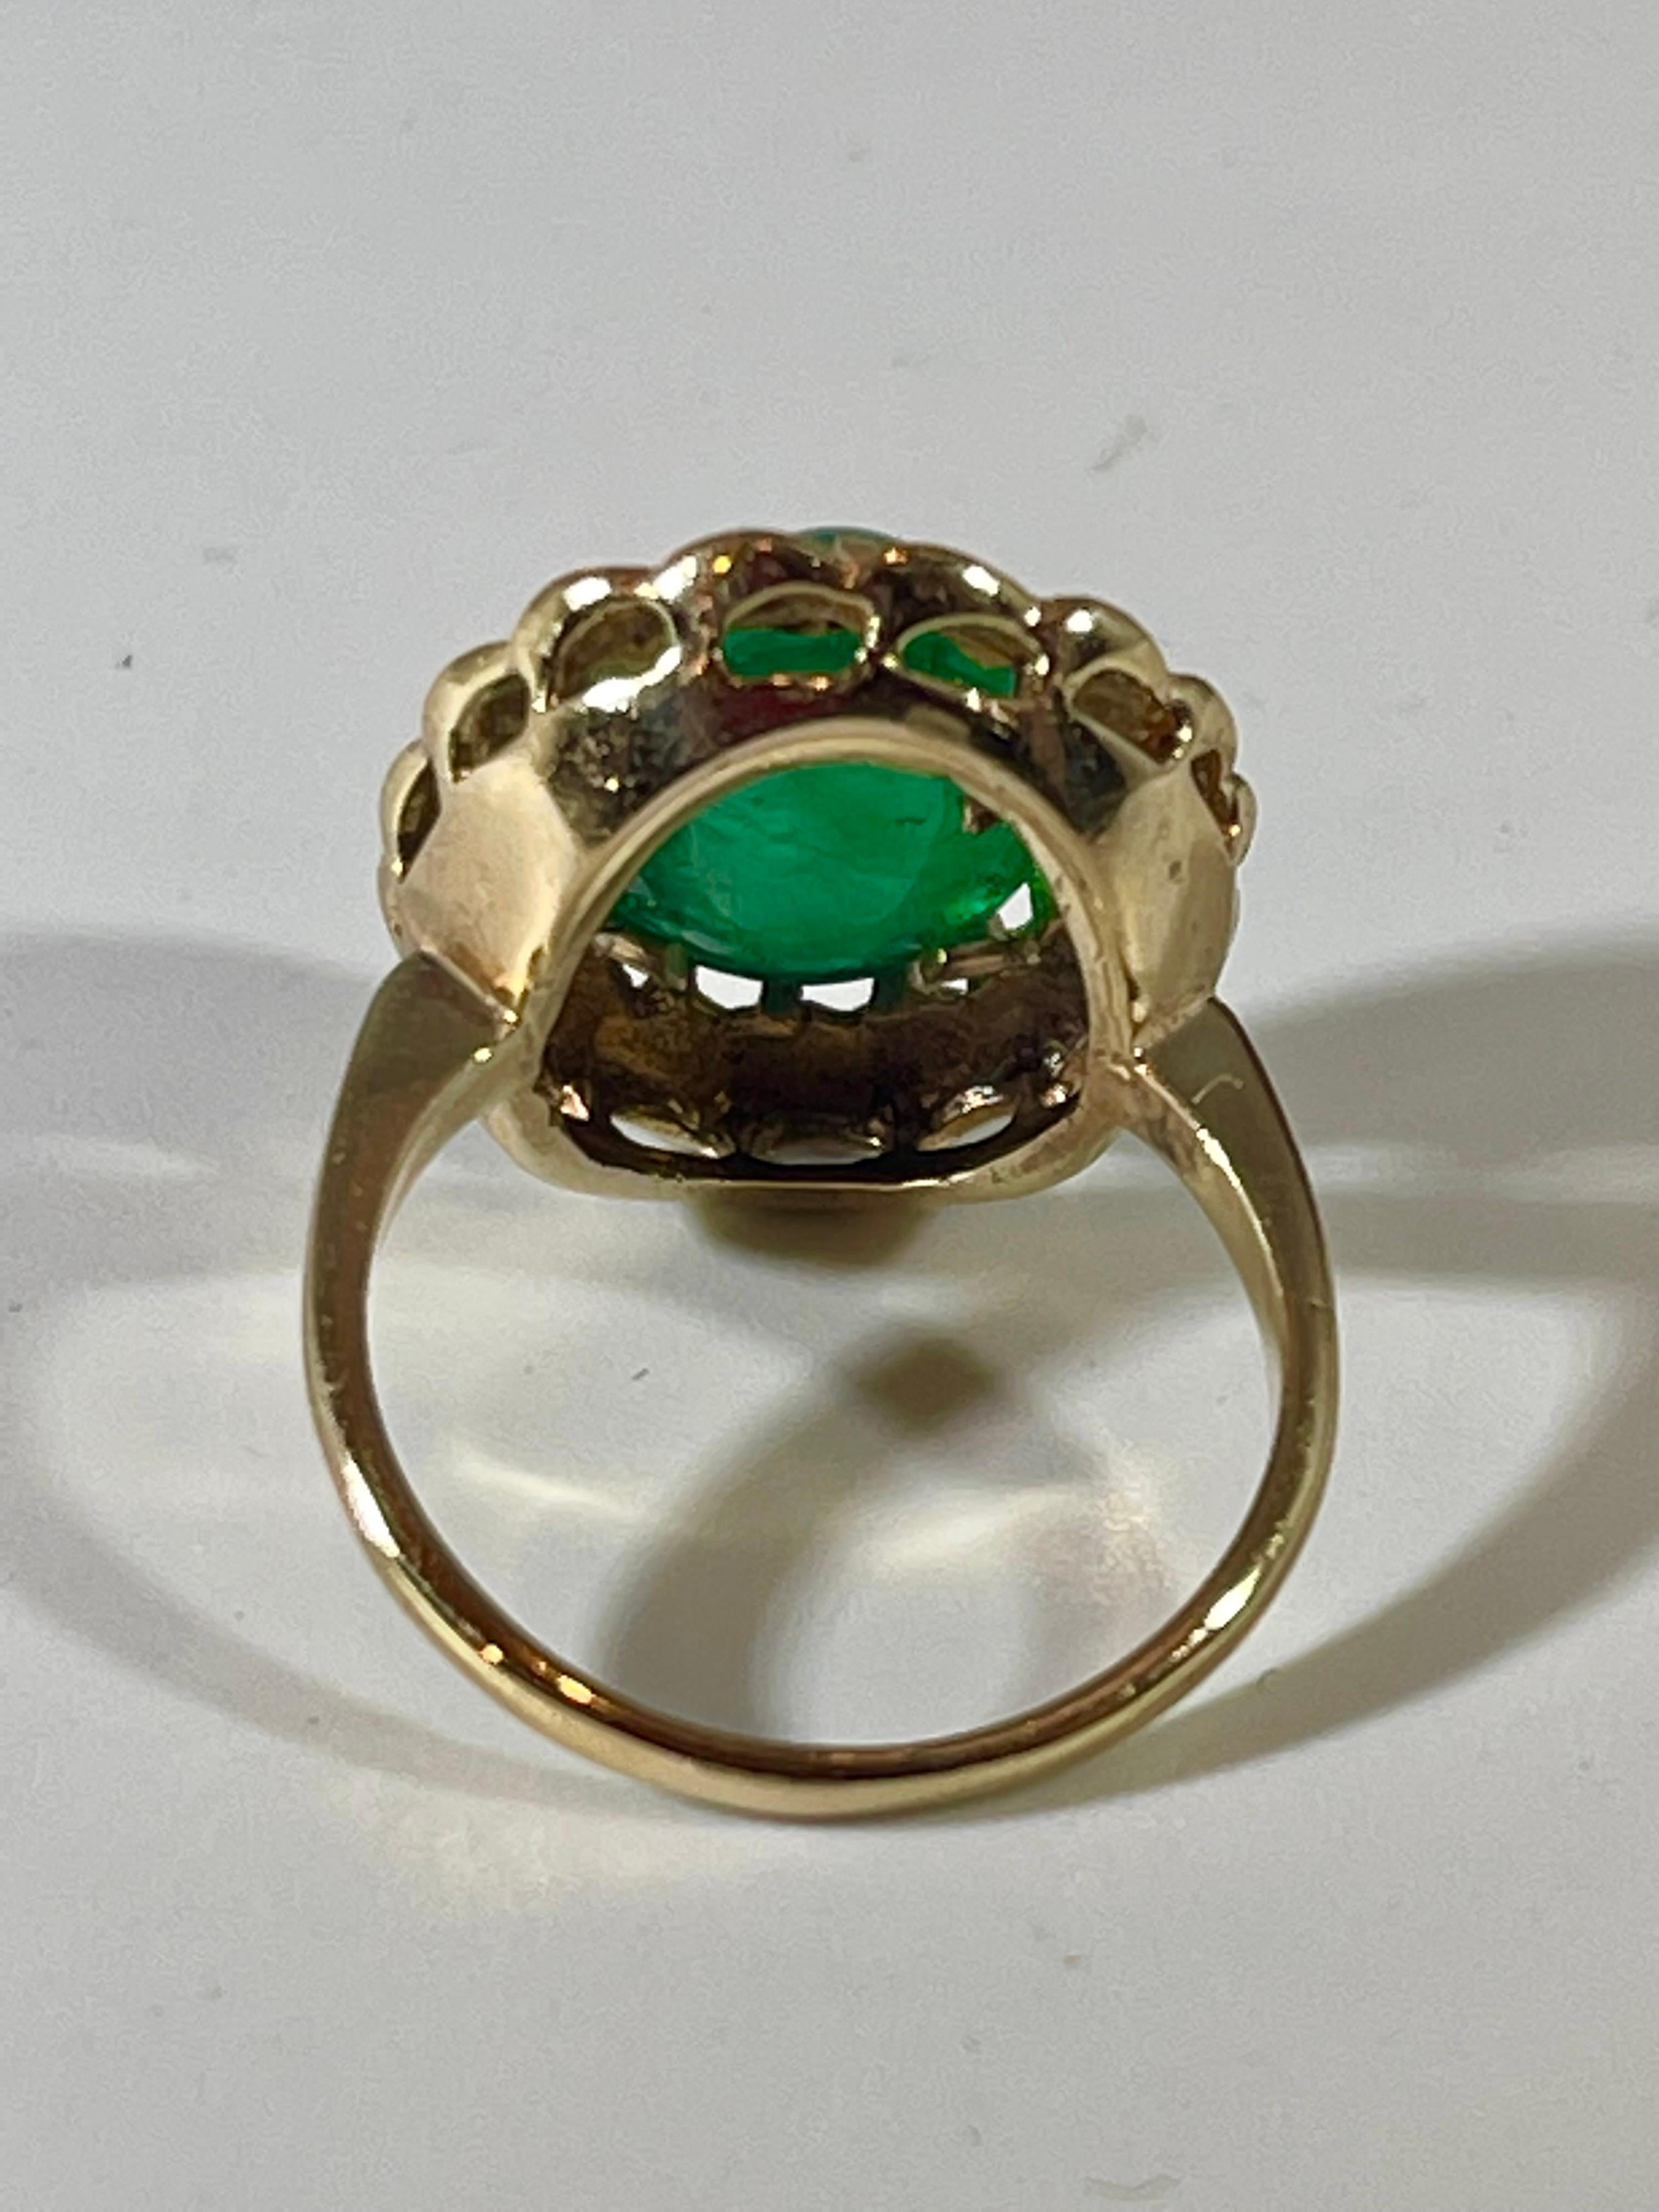 4.5 Carat Oval Emerald Cabochon 14 Karat Yellow Gold Cocktail Ring Vintage  For Sale 4